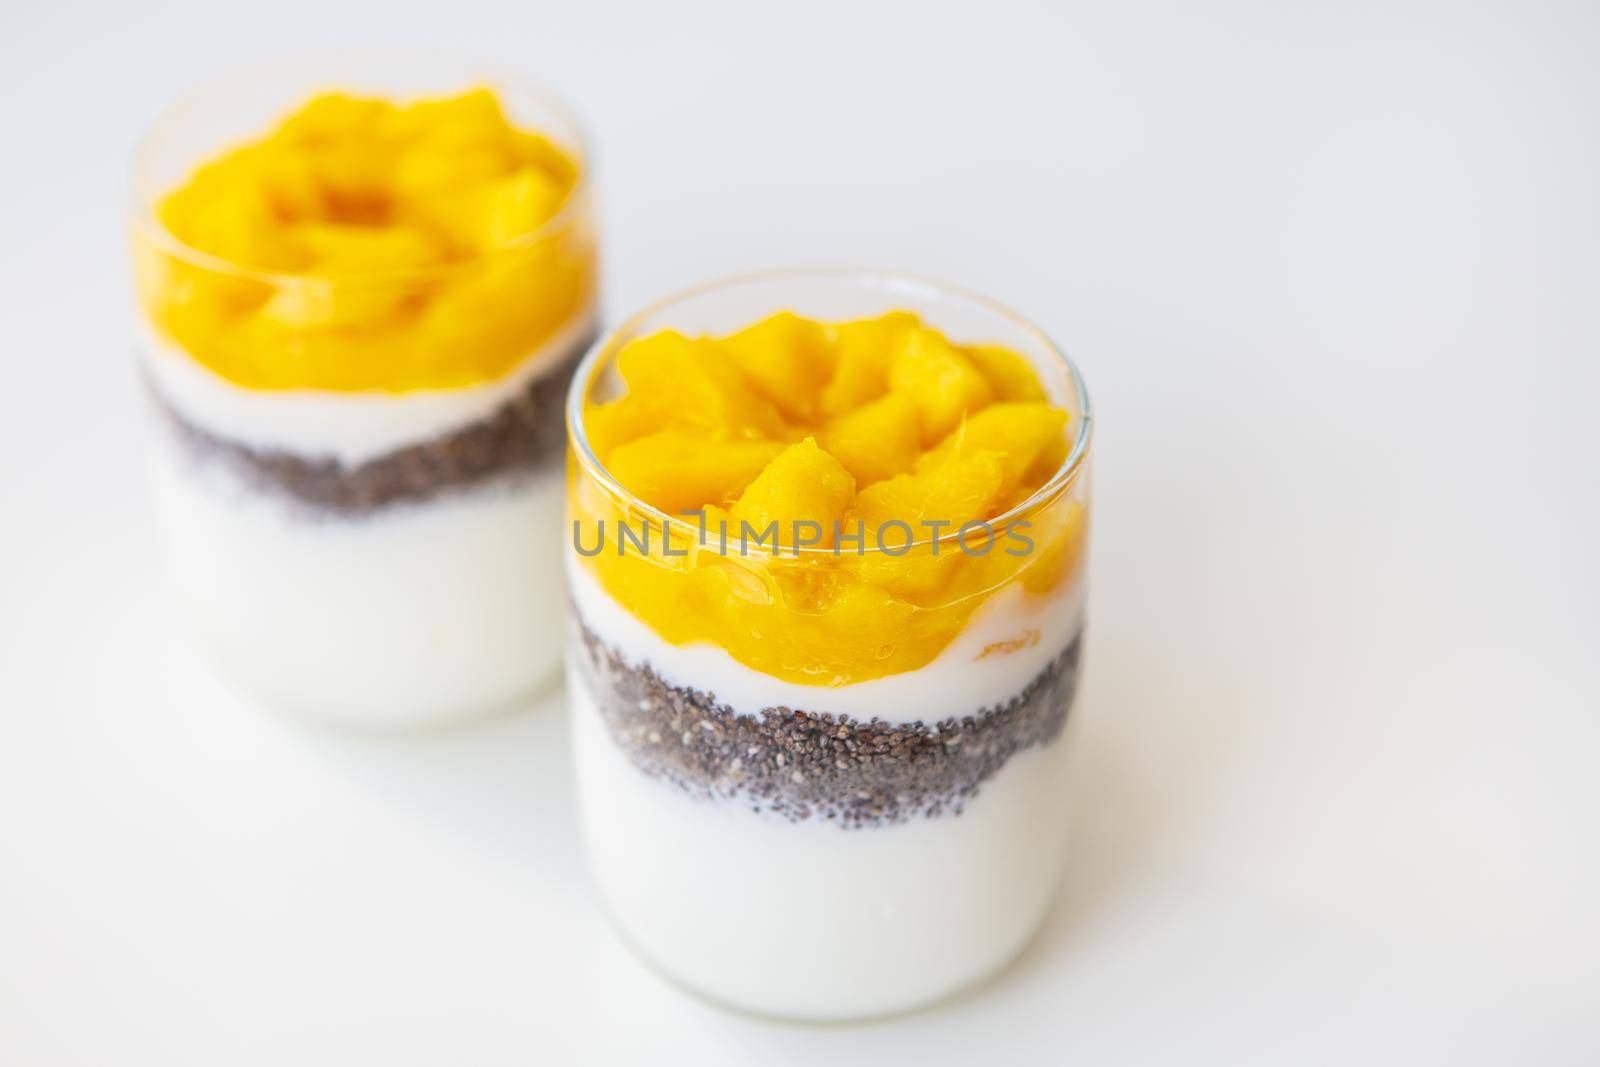 Delicious mango dessert with yogurt and chia seeds. The concept of healthy and tasty food. Good morning, lovely breakfast